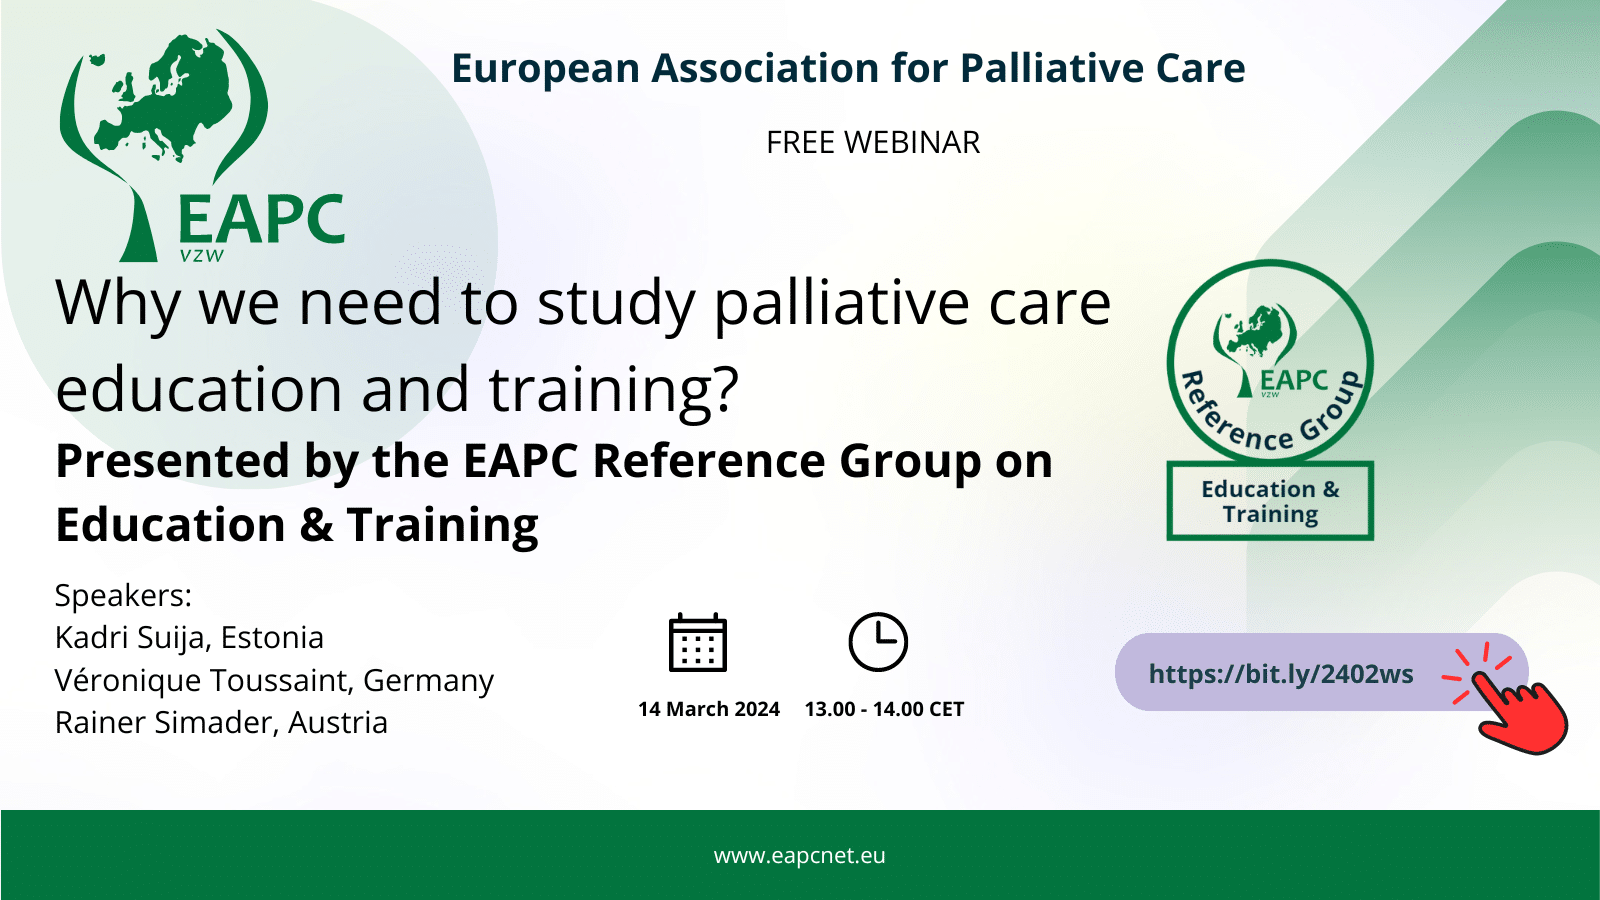 EAPC Webinar: Why we need to study palliative care education and training?